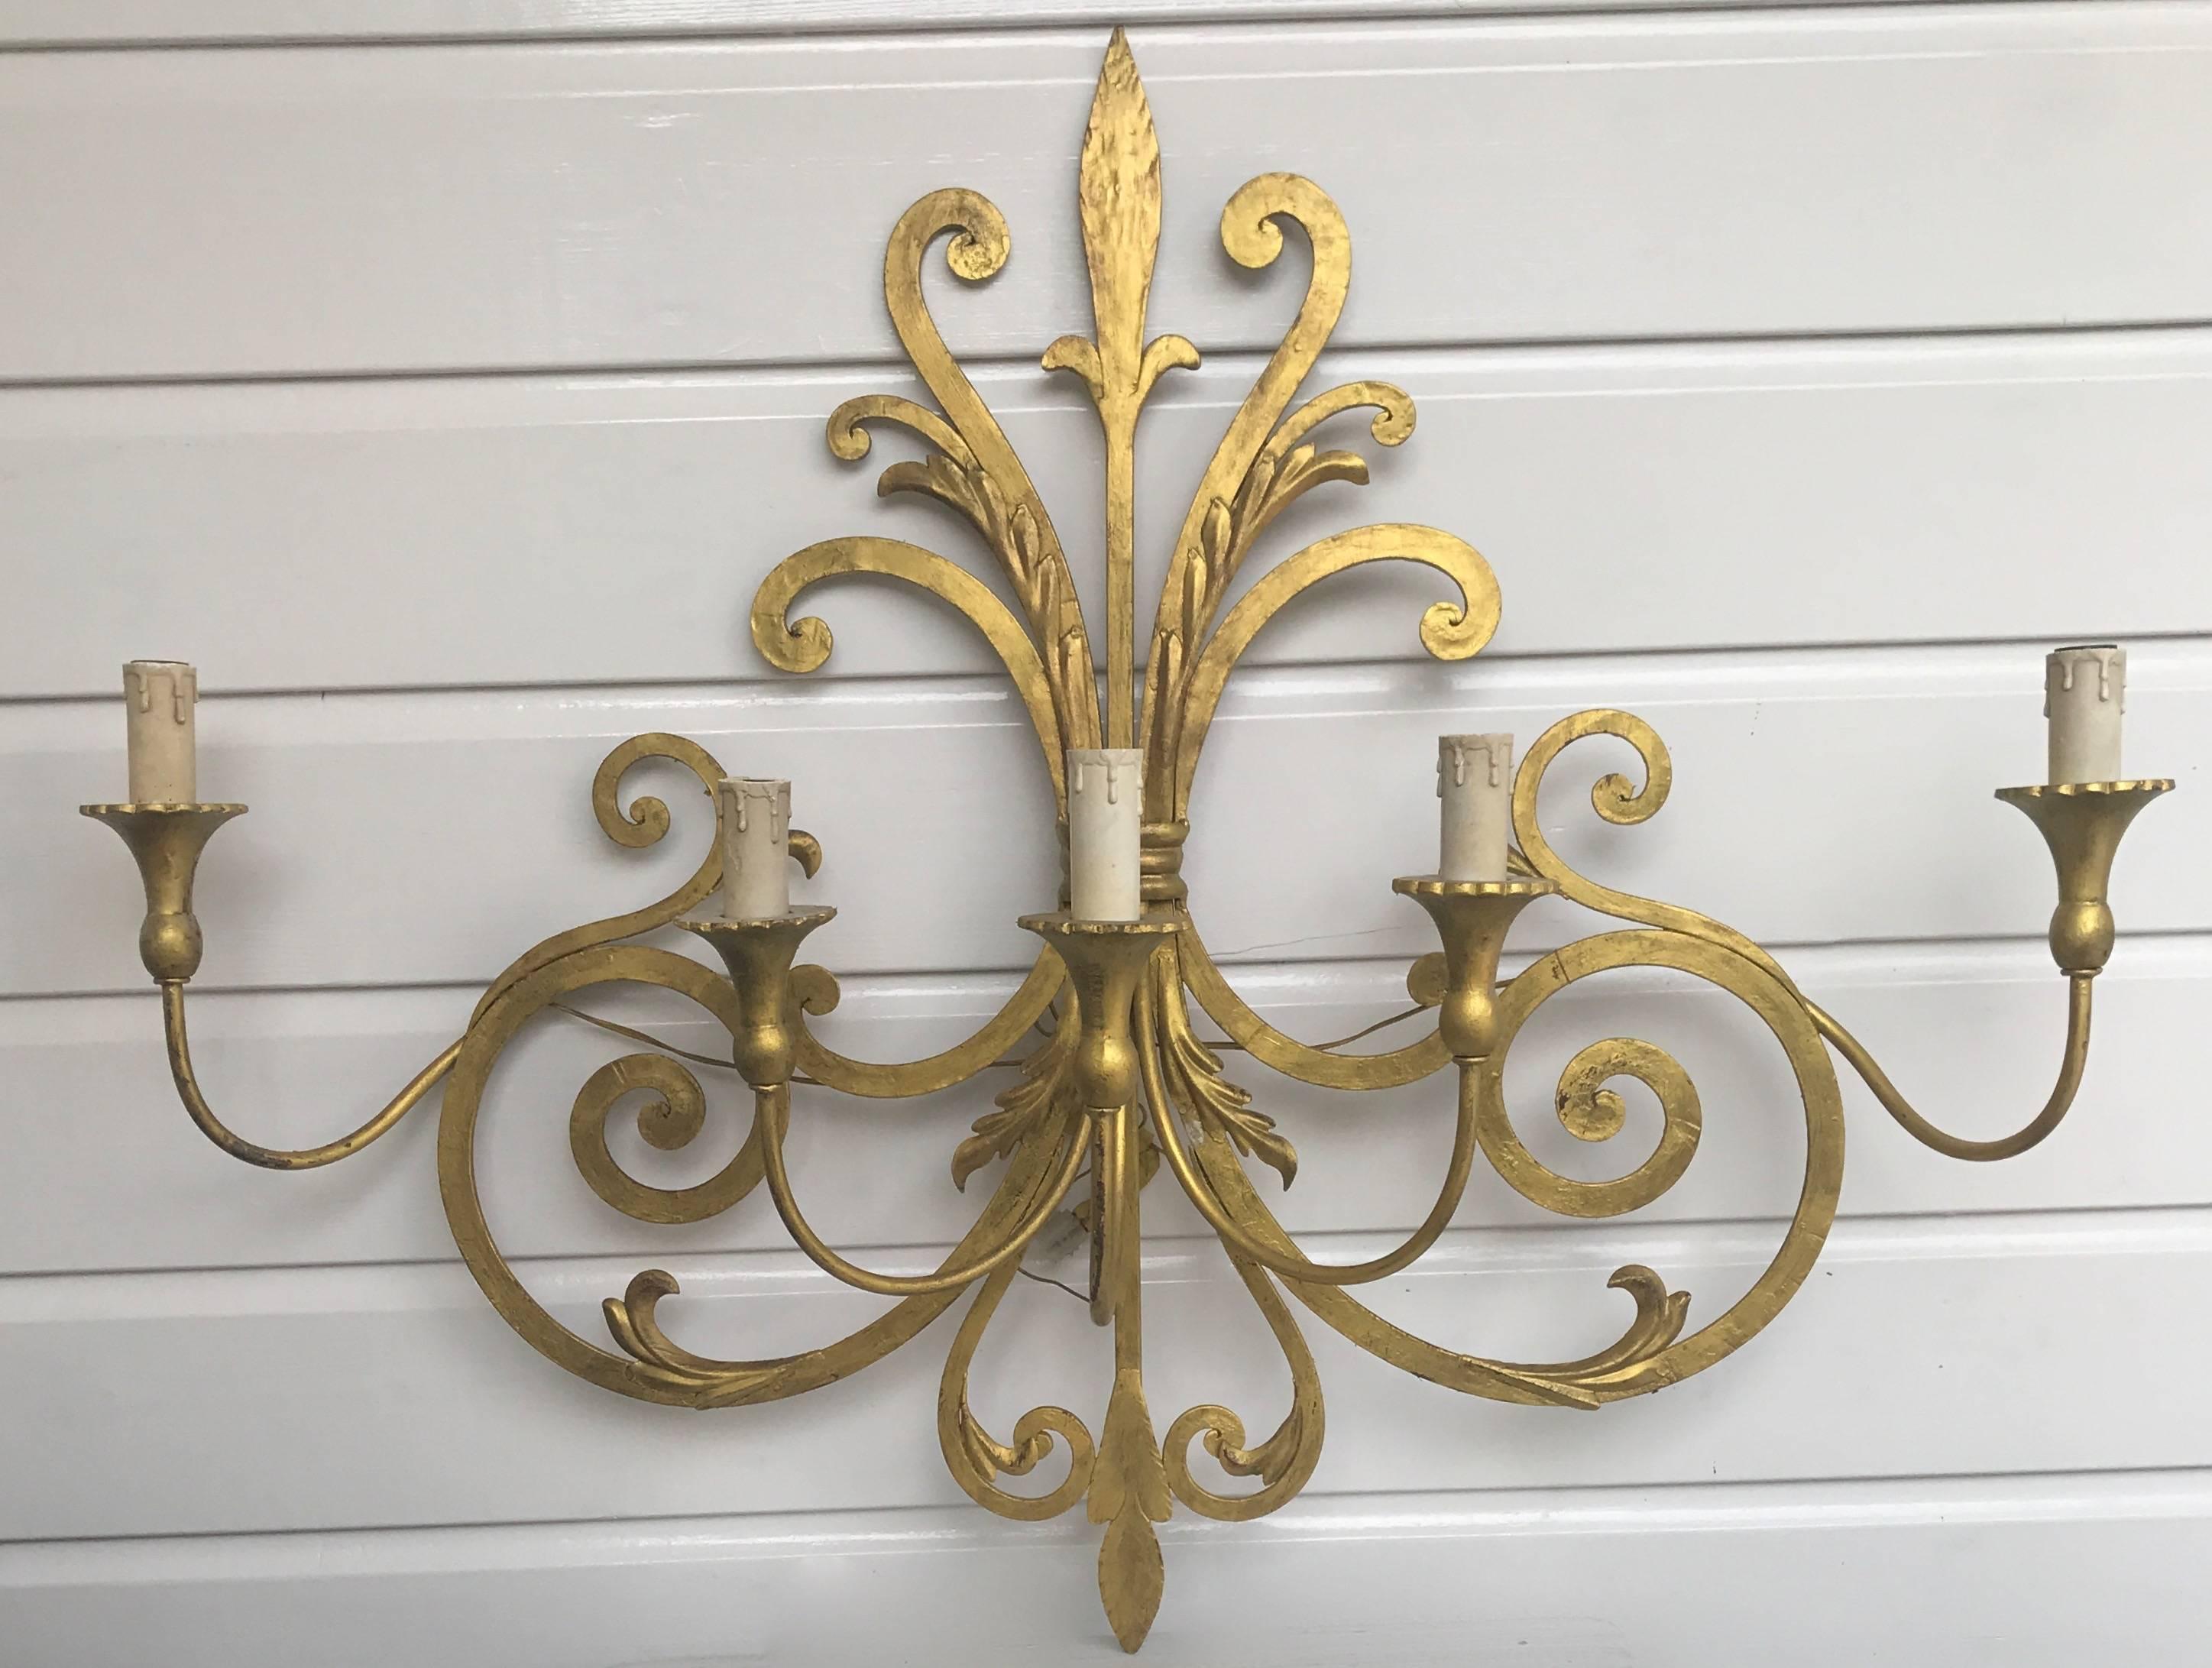 Large, handcrafted and elegant wall sconce.

This sizeable and handcrafted sconce comes with several gold painted scrolling motifs. This elegant shape is a joy to own and look at, both on and off. The thick scrolls in the back are made of